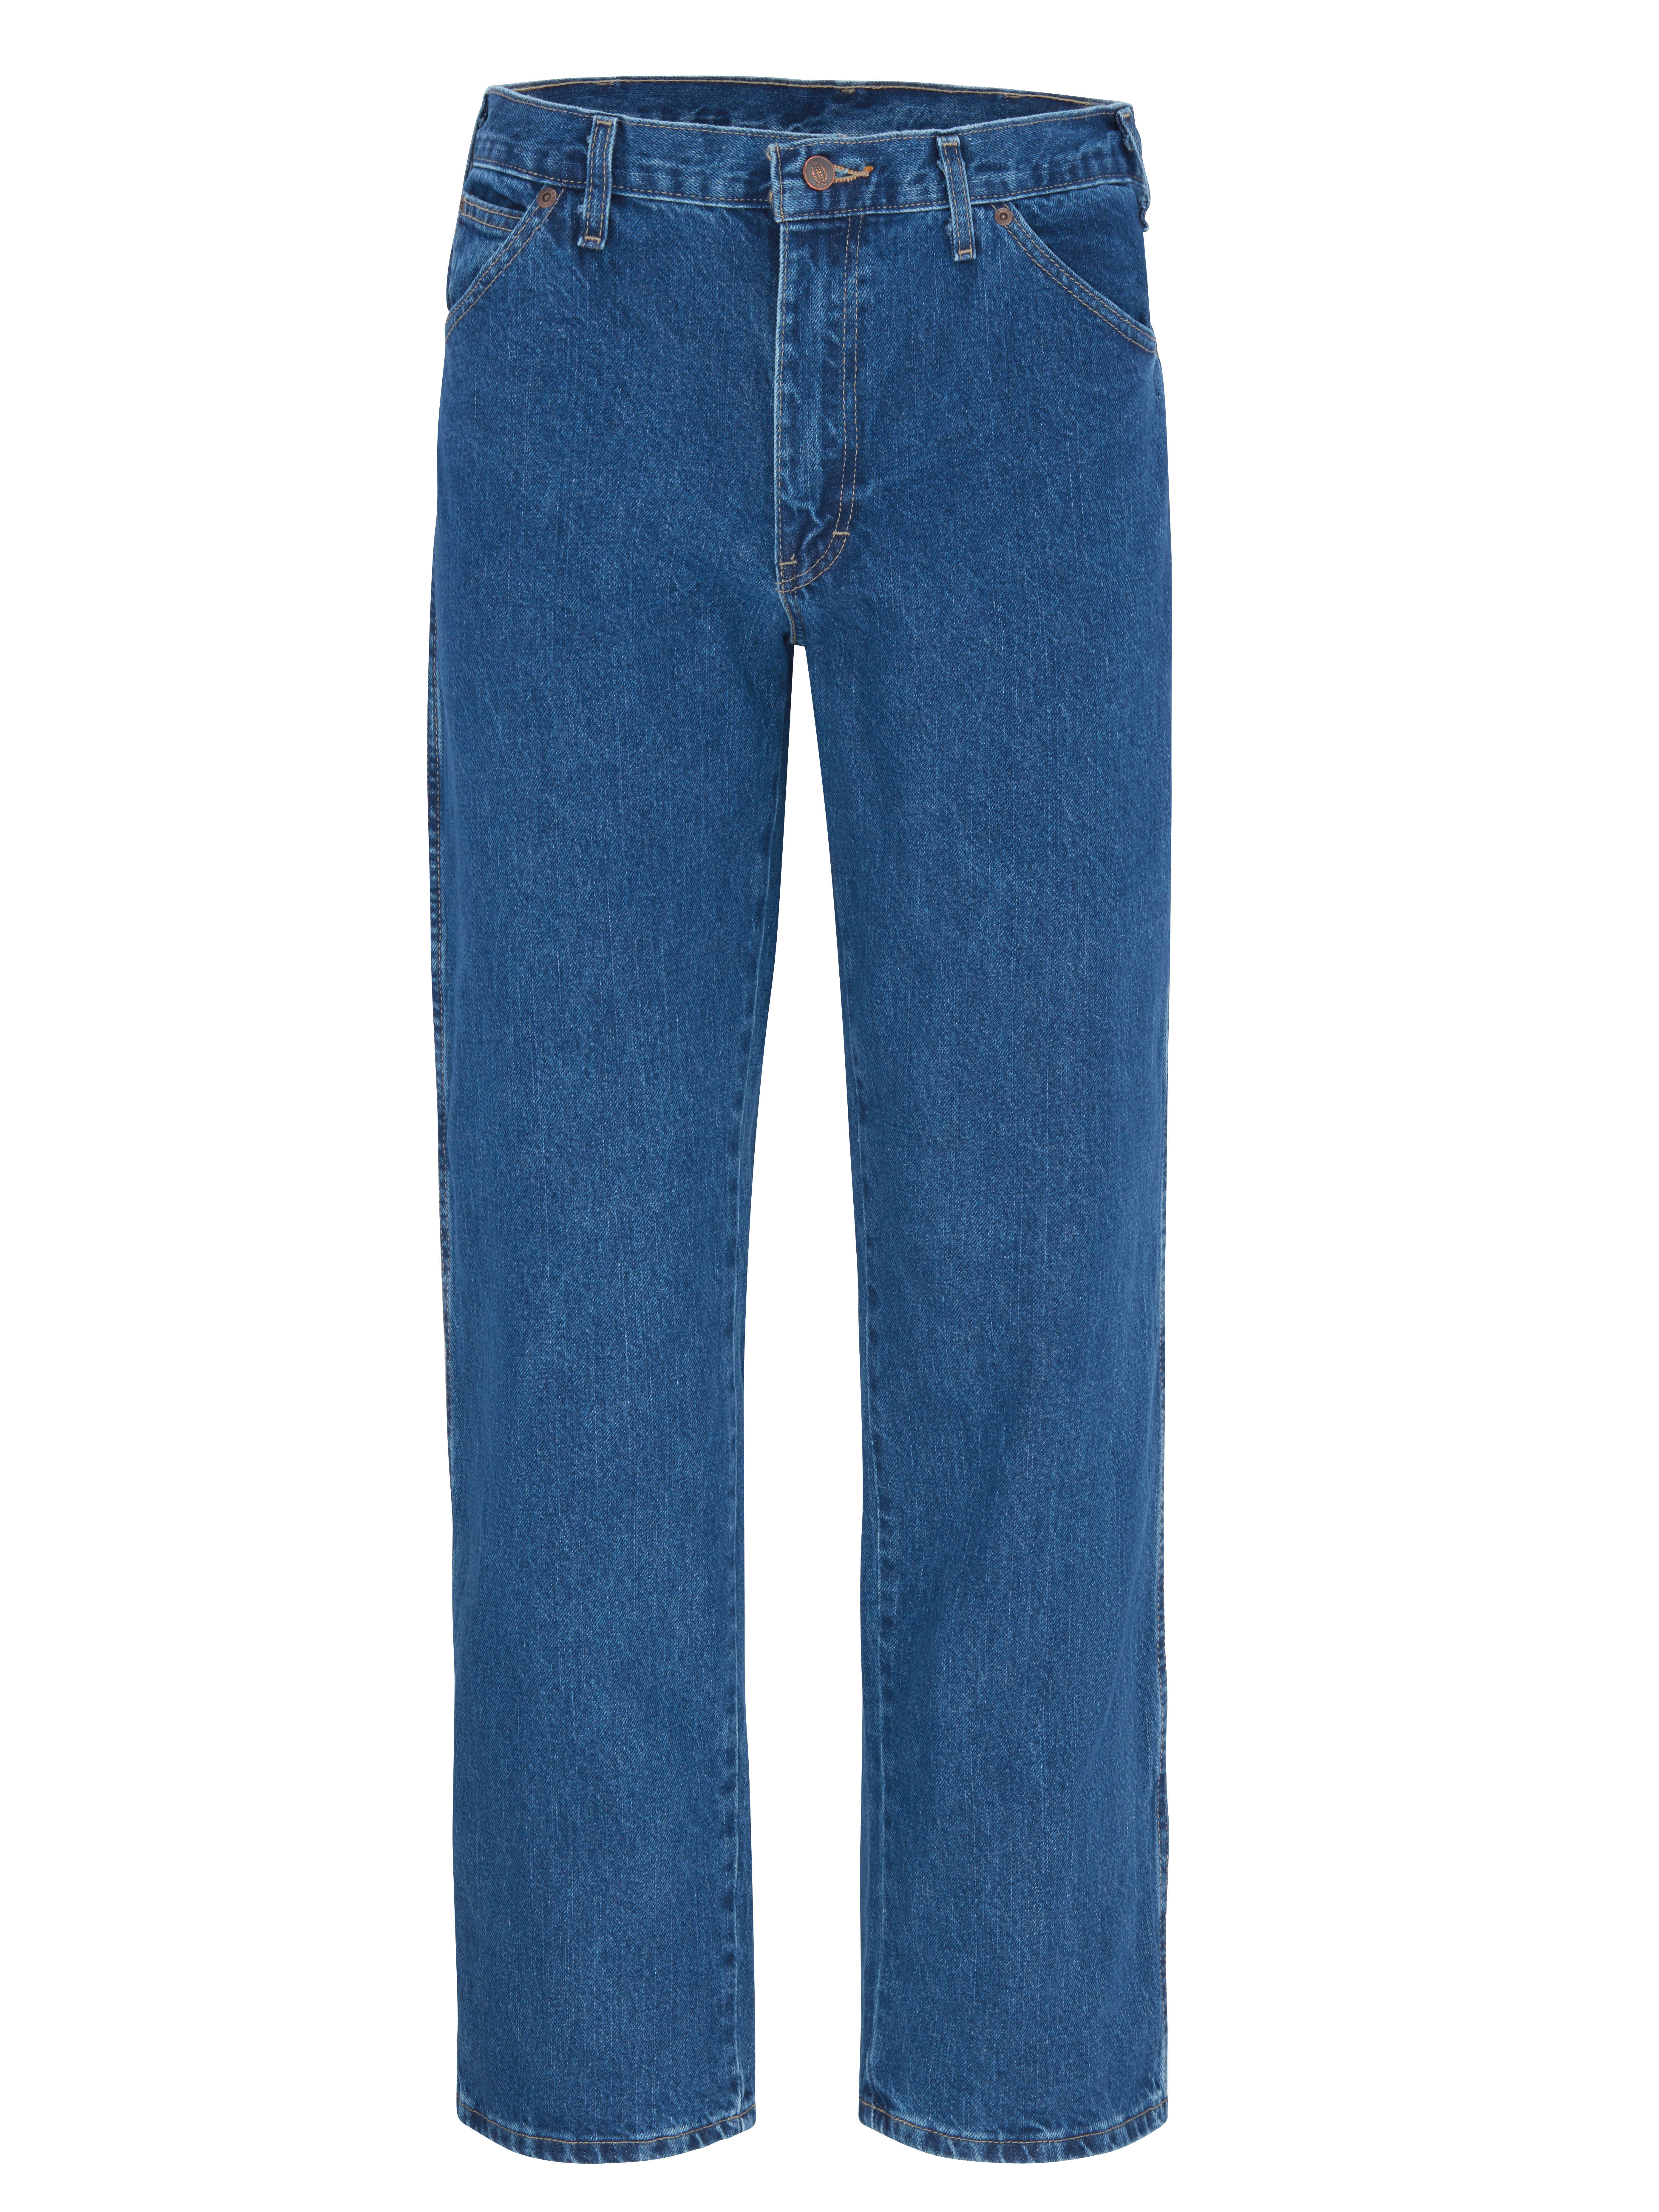 Picture of Dickies® 1329 Men's 5-Pocket Relaxed Fit Jean